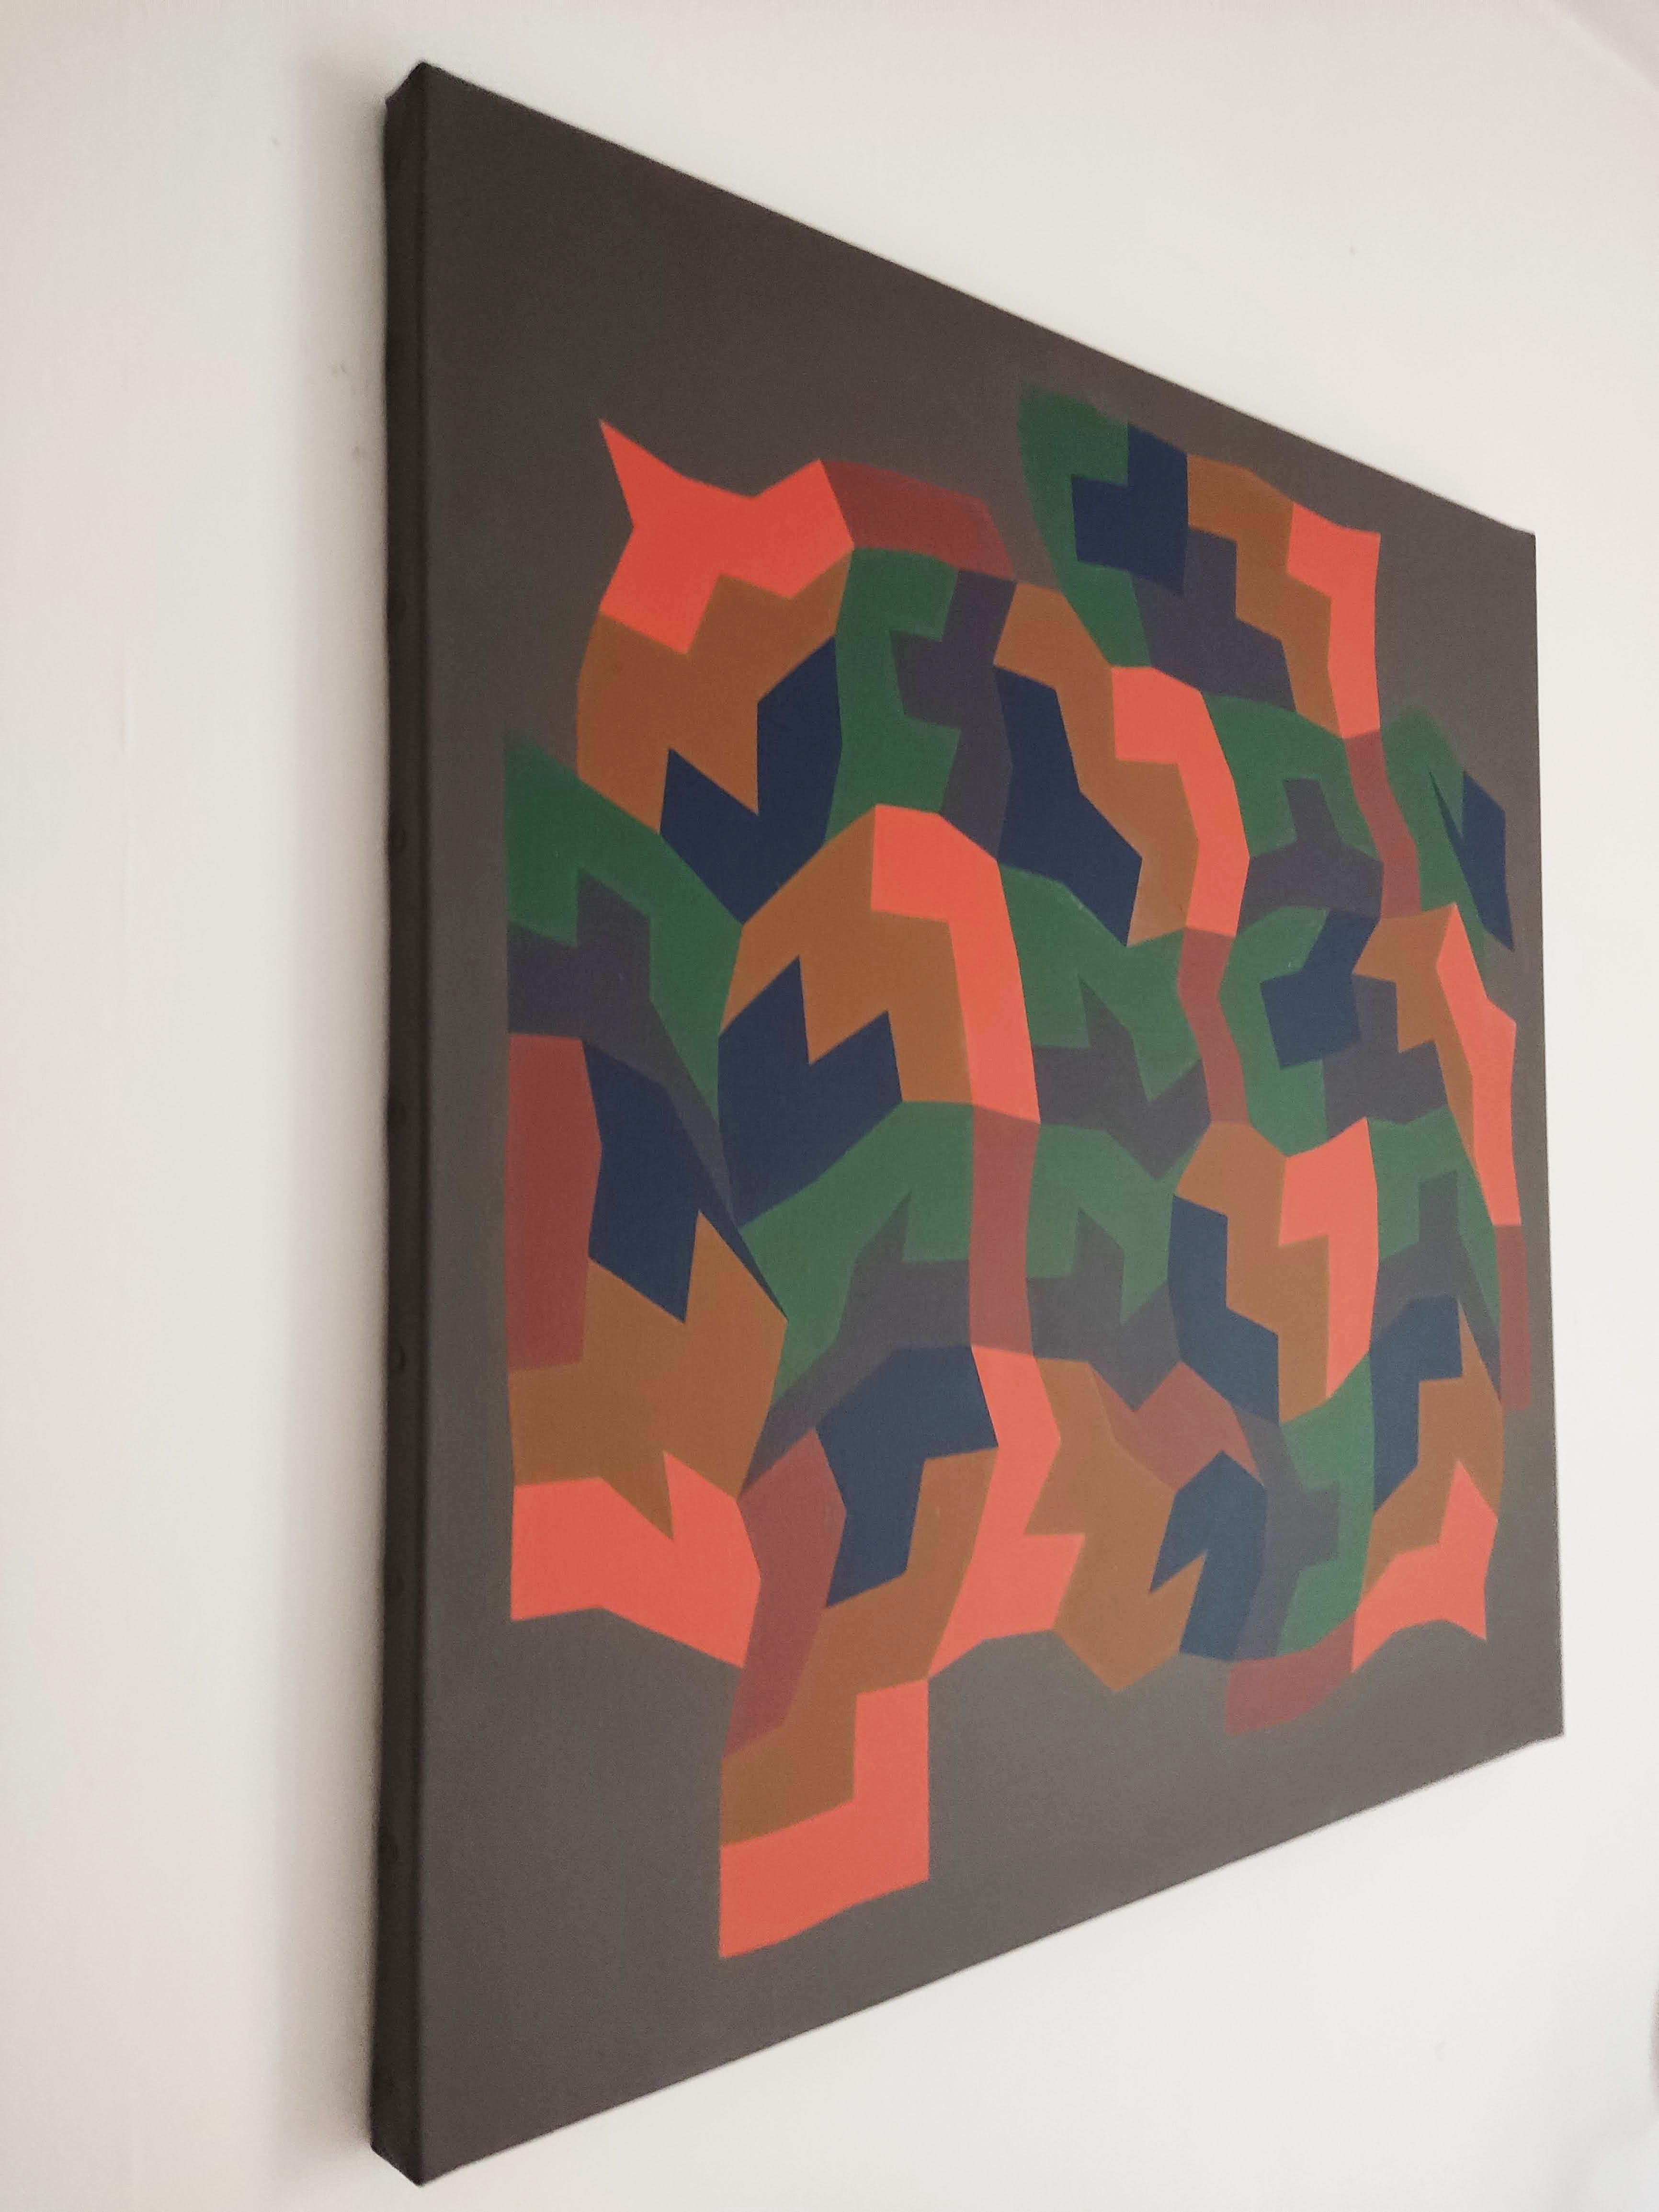 Vinyl and Acrylic painting on Linen Canvas - Original Painting, Abstract Geometric, Interior Design
Work Title : Multiple #2
Artist : Christophe Drodelot (French artist, Born in 1965, lives and works in Nantes - France.)

The work is signed and